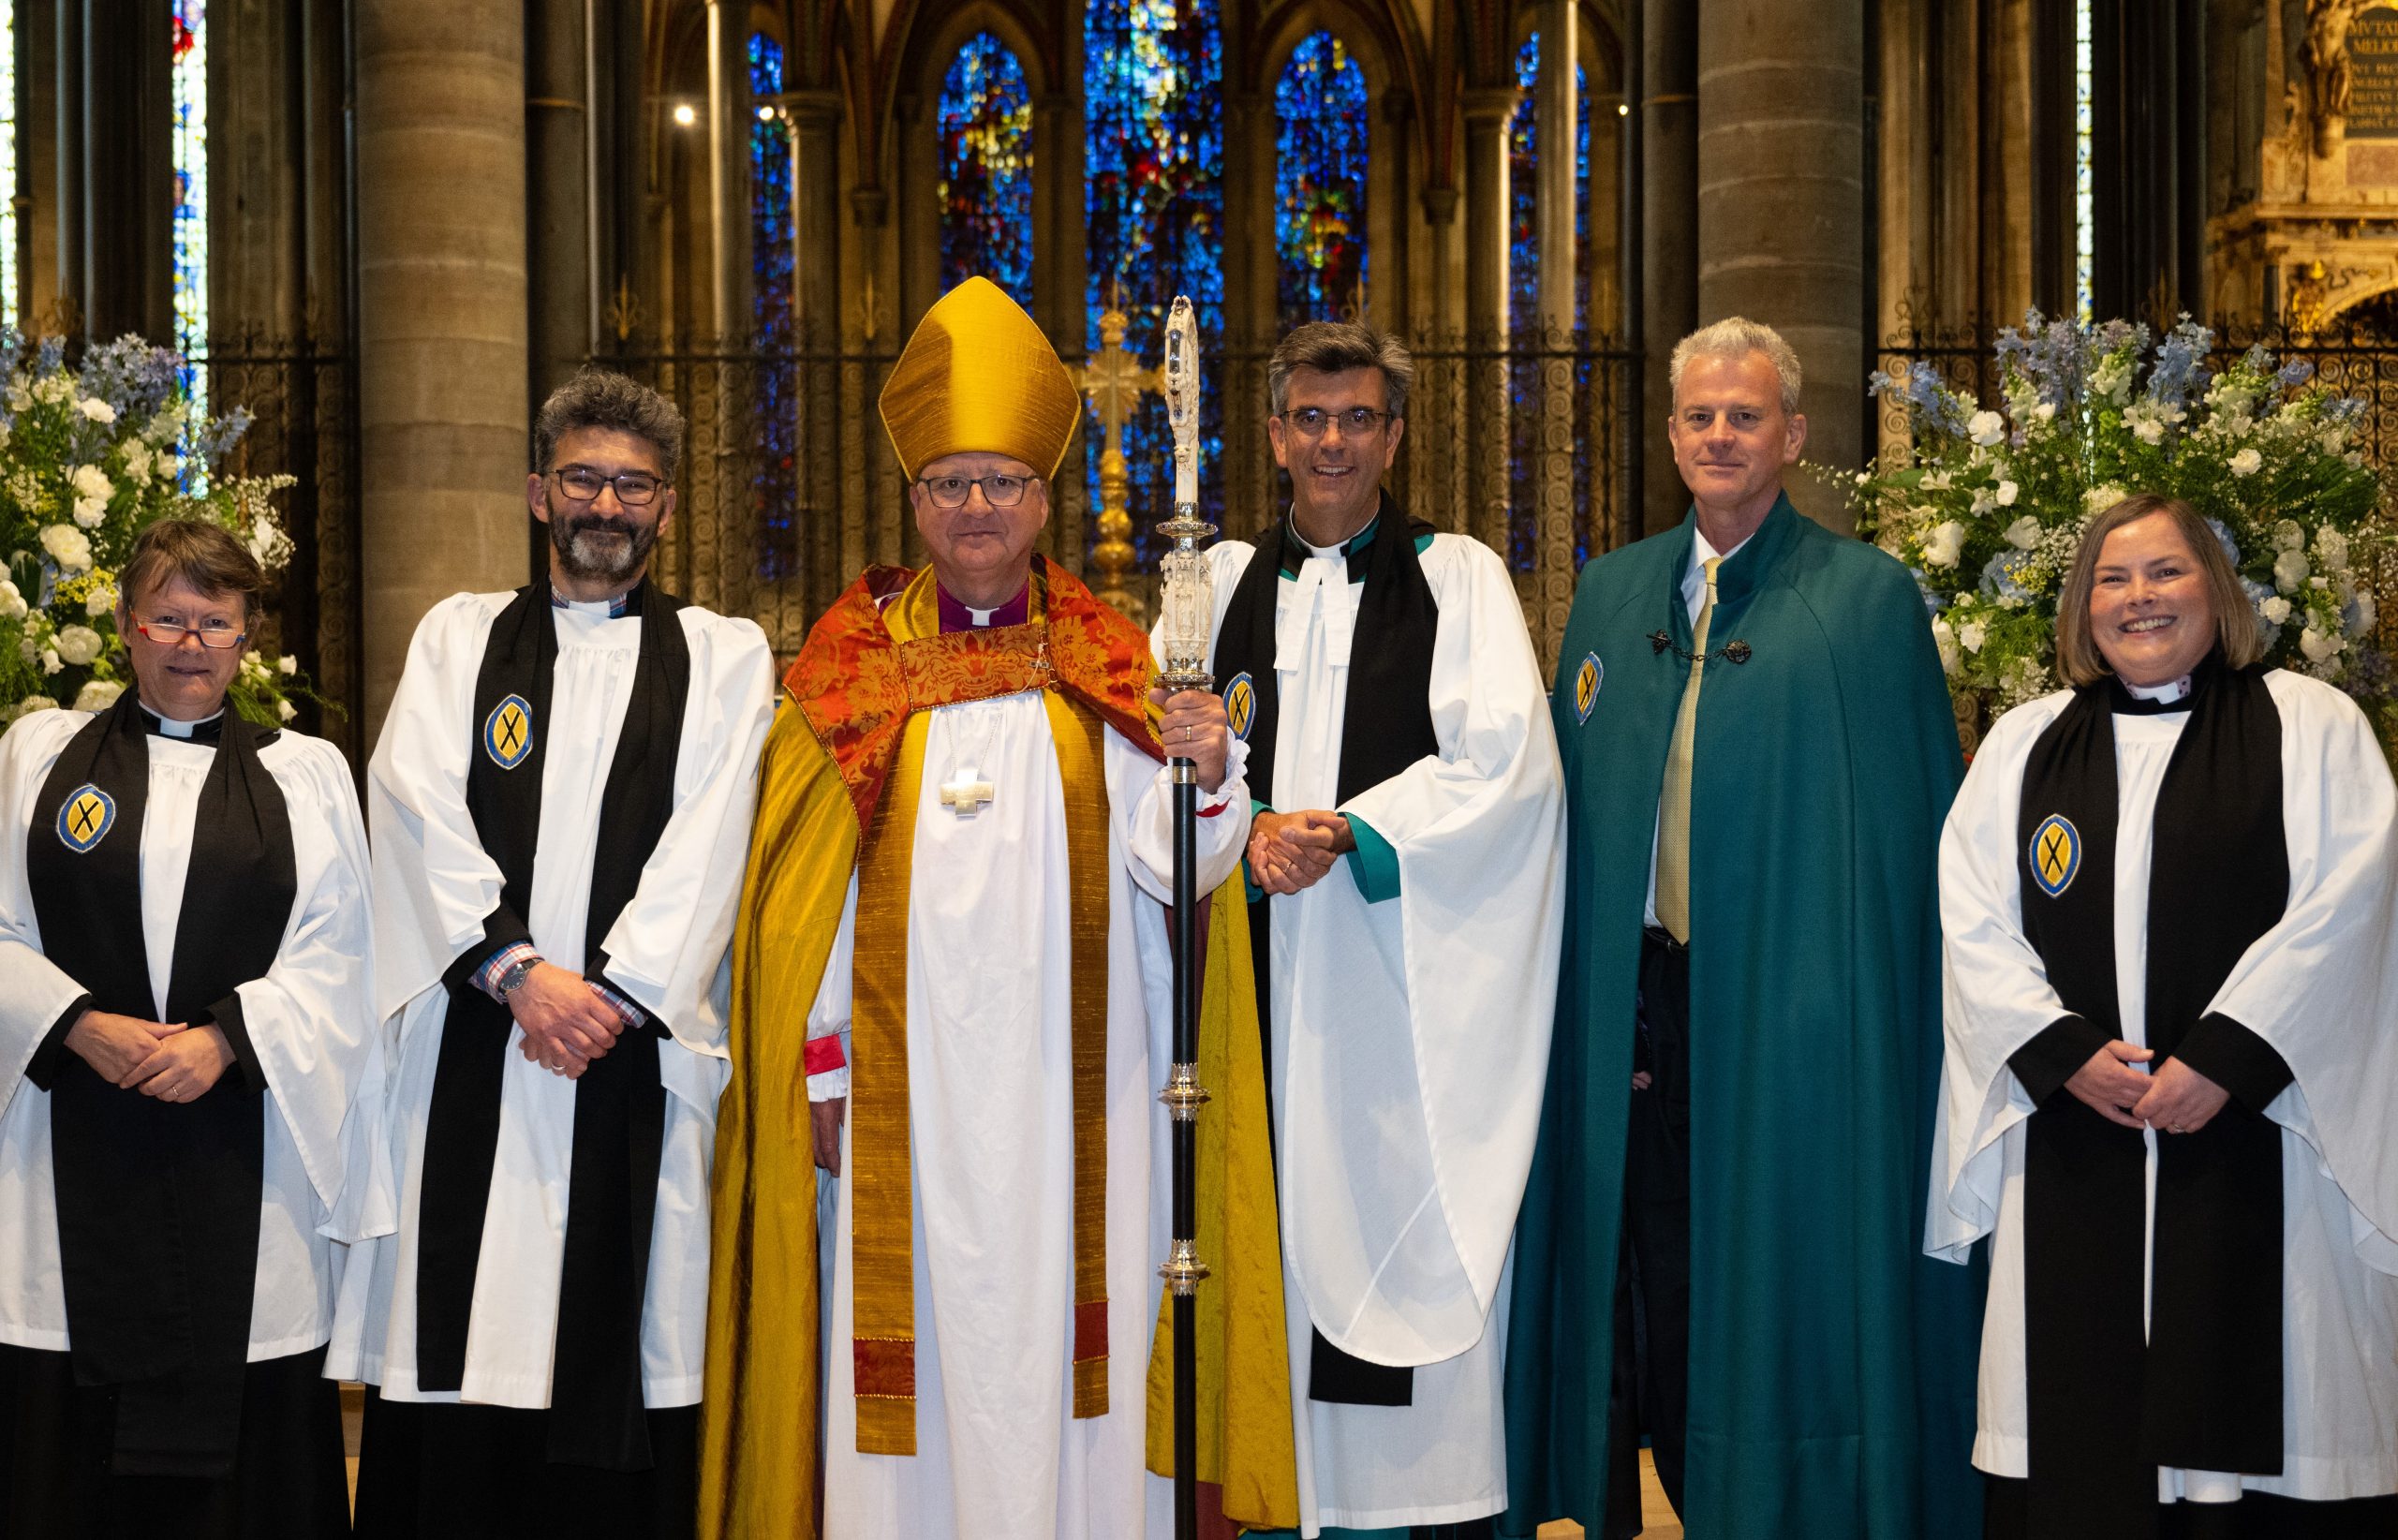 Four new canons join Salisbury Cathedral’s College of Canons